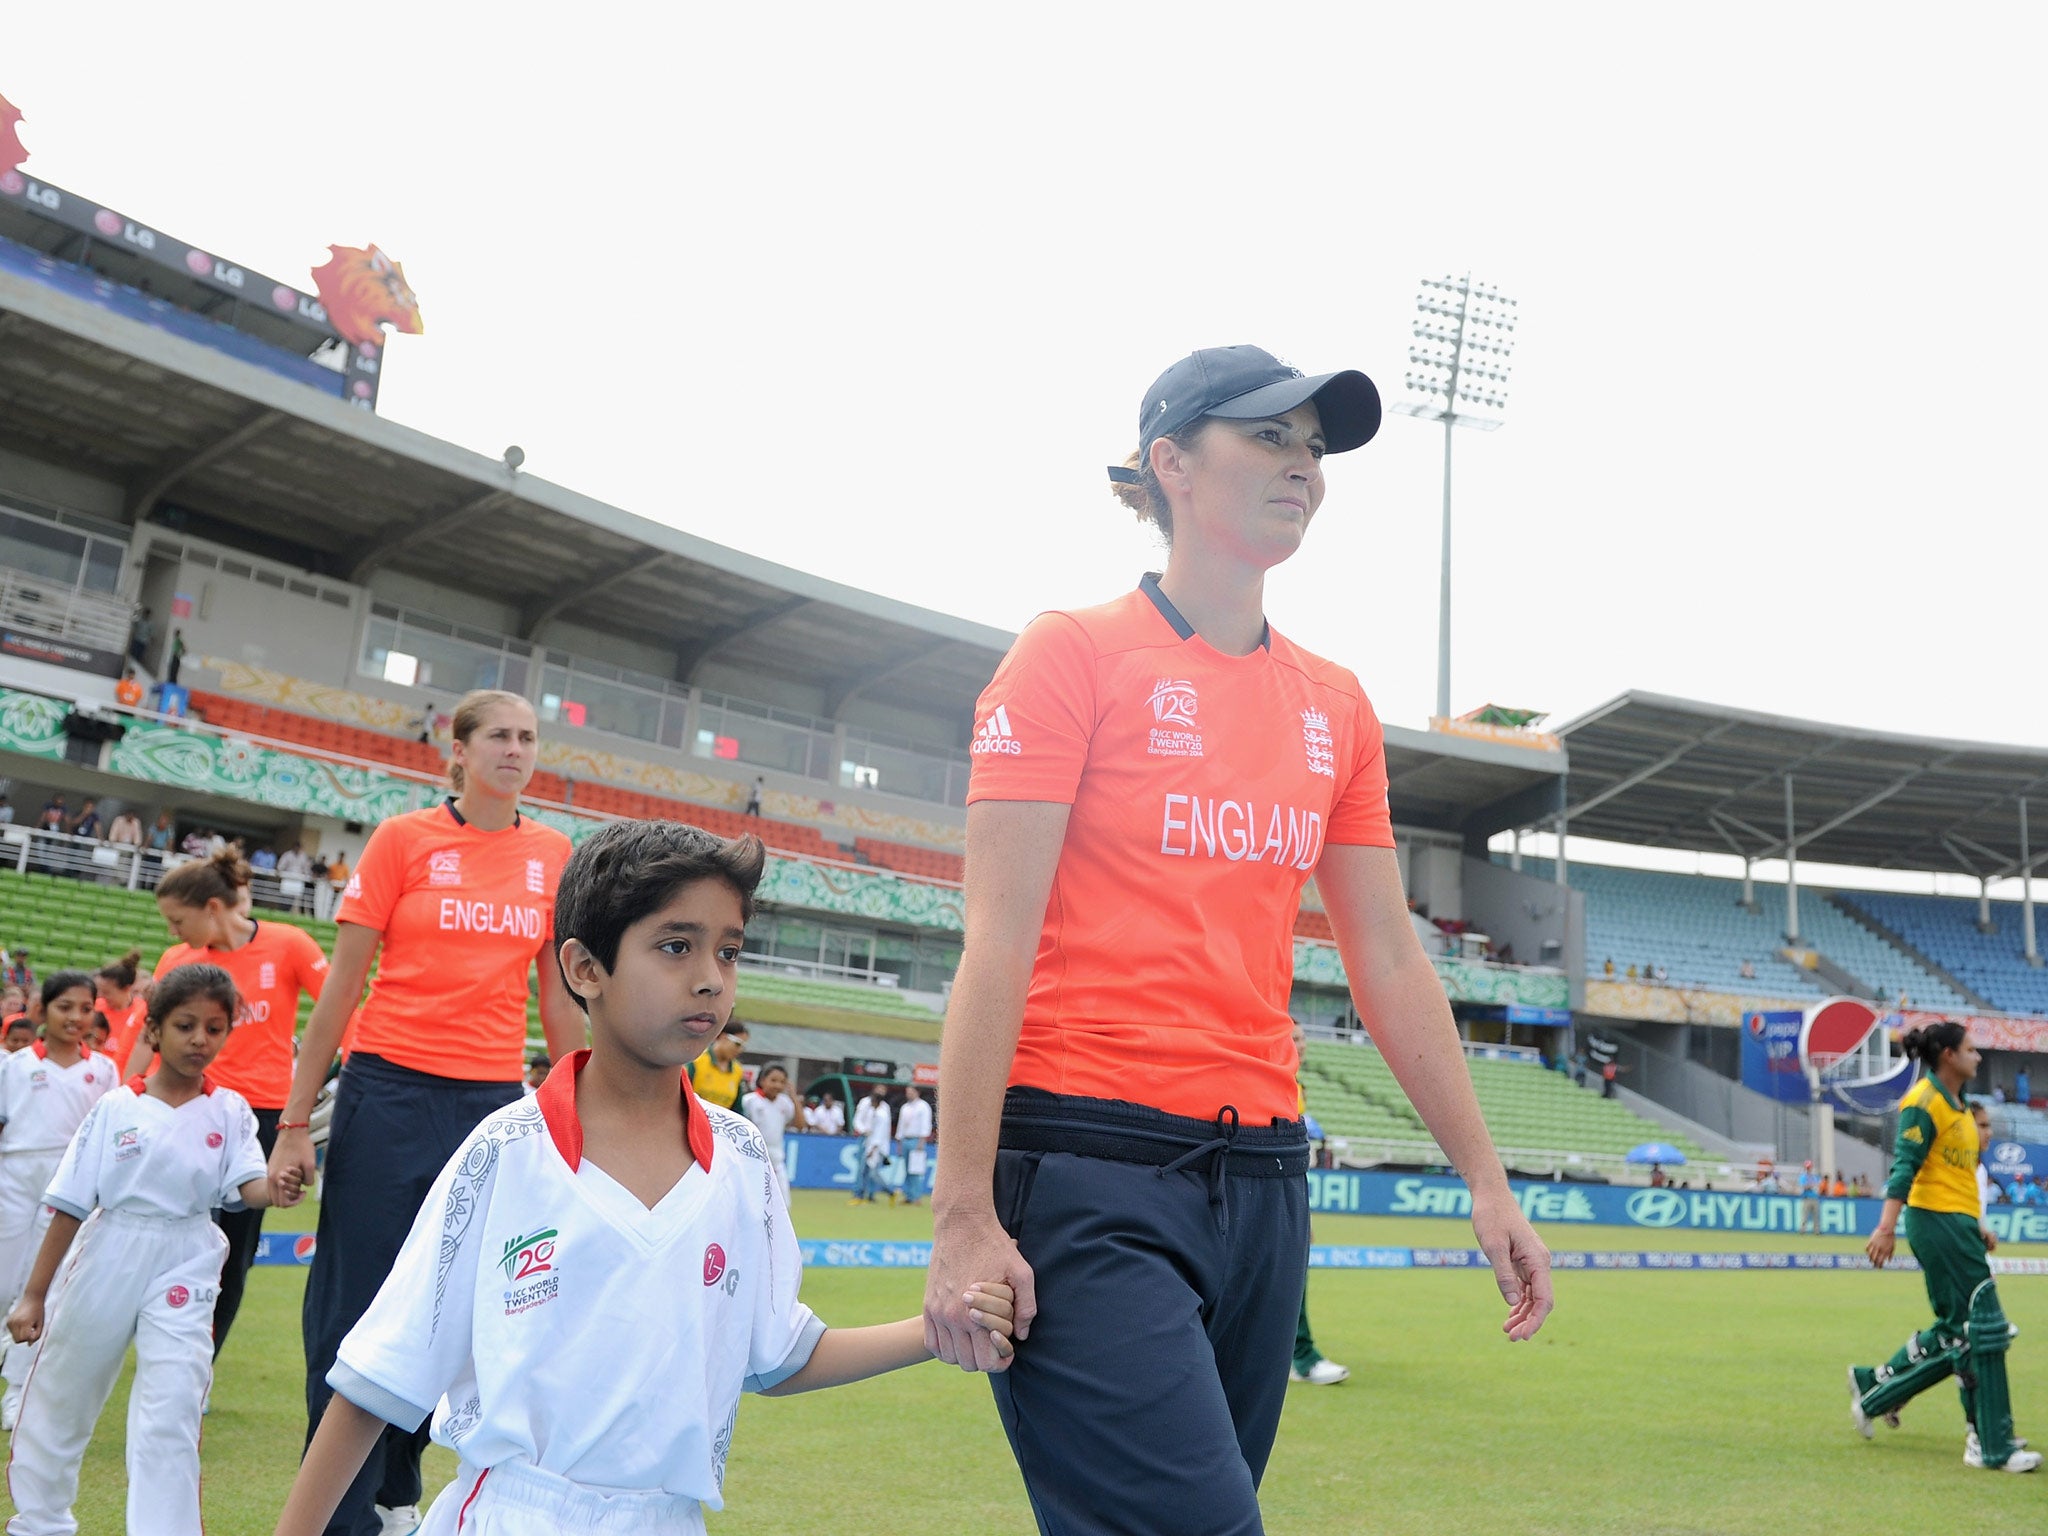 Charlotte Edwards leads out the England team in the victory over South Africa in the Women's World Twenty20